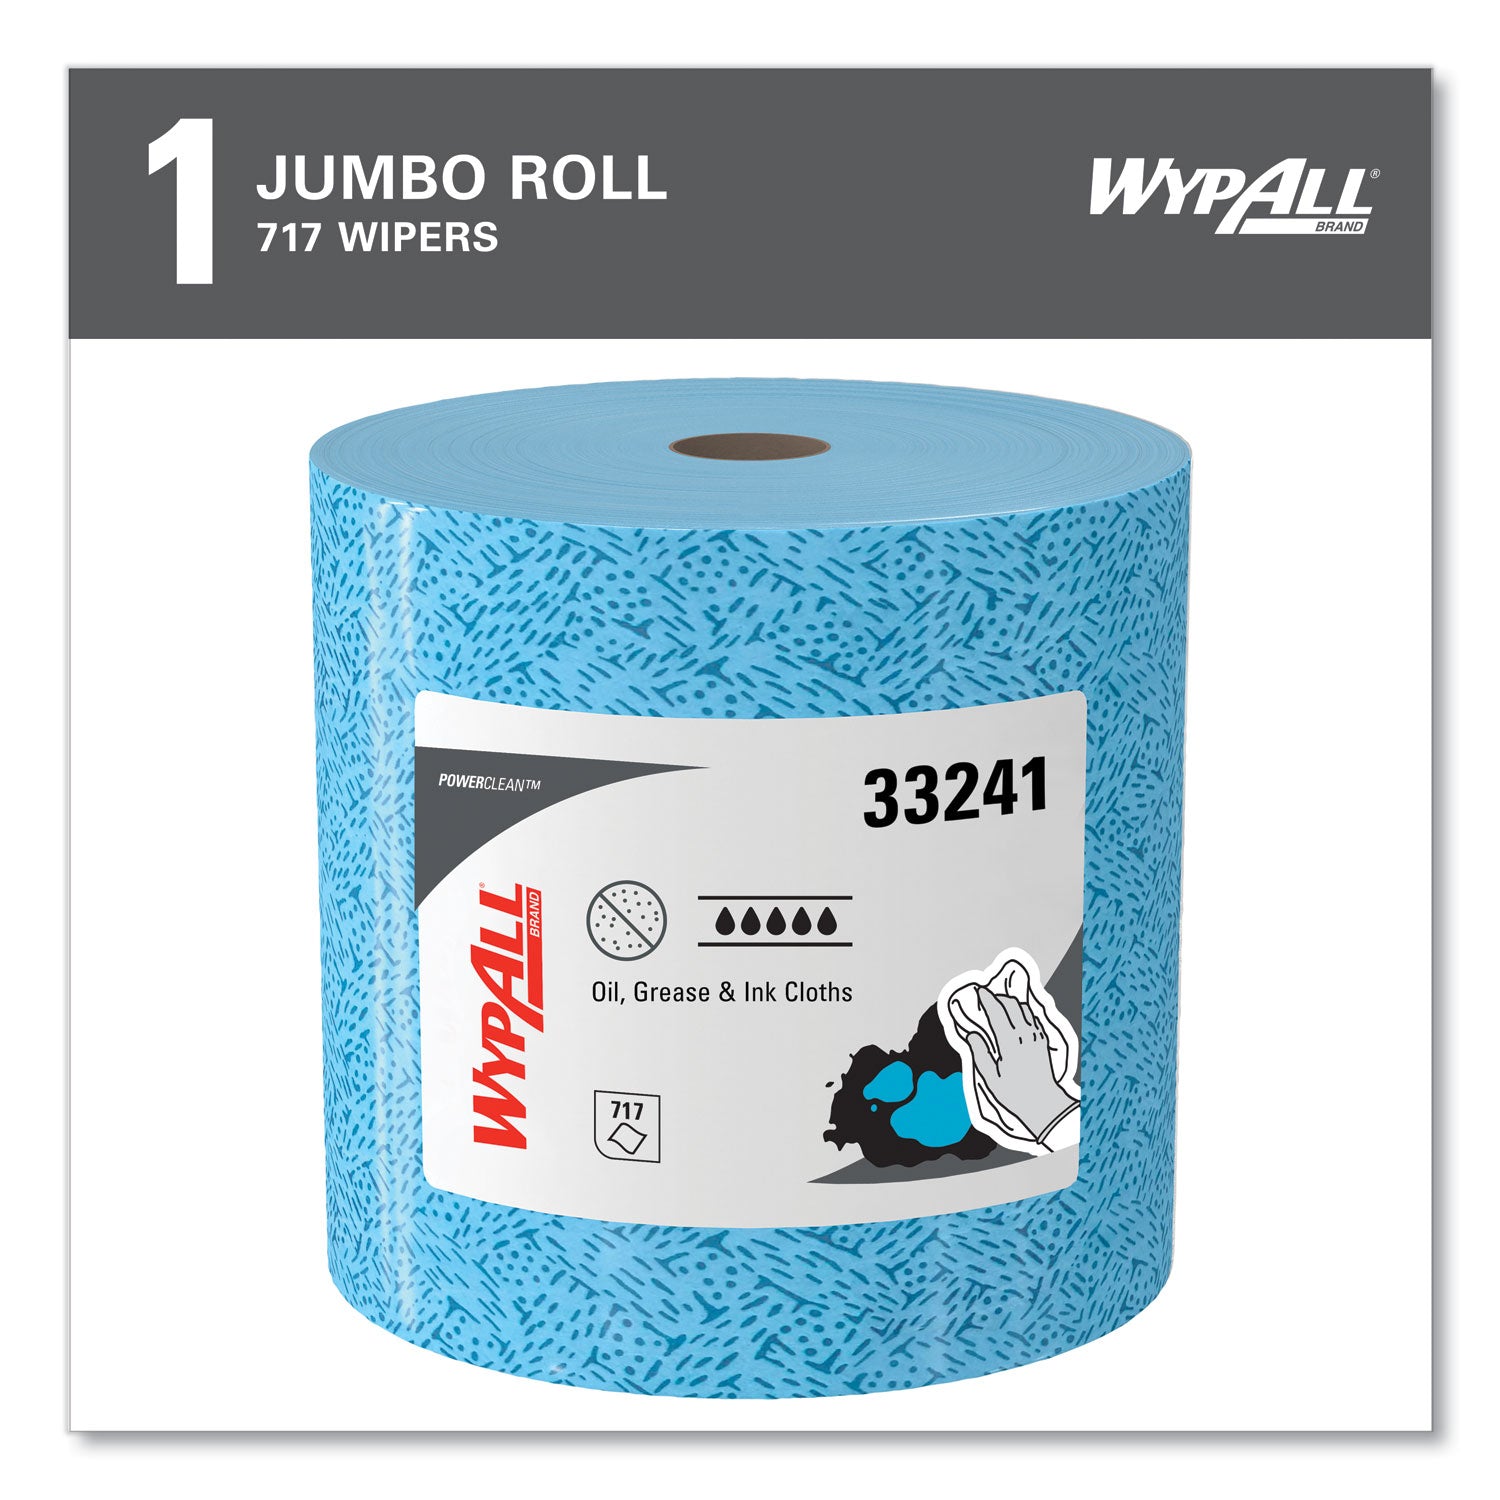 oil-grease-and-ink-cloths-jumbo-roll-98-x-122-blue-717-roll_kcc33241 - 3